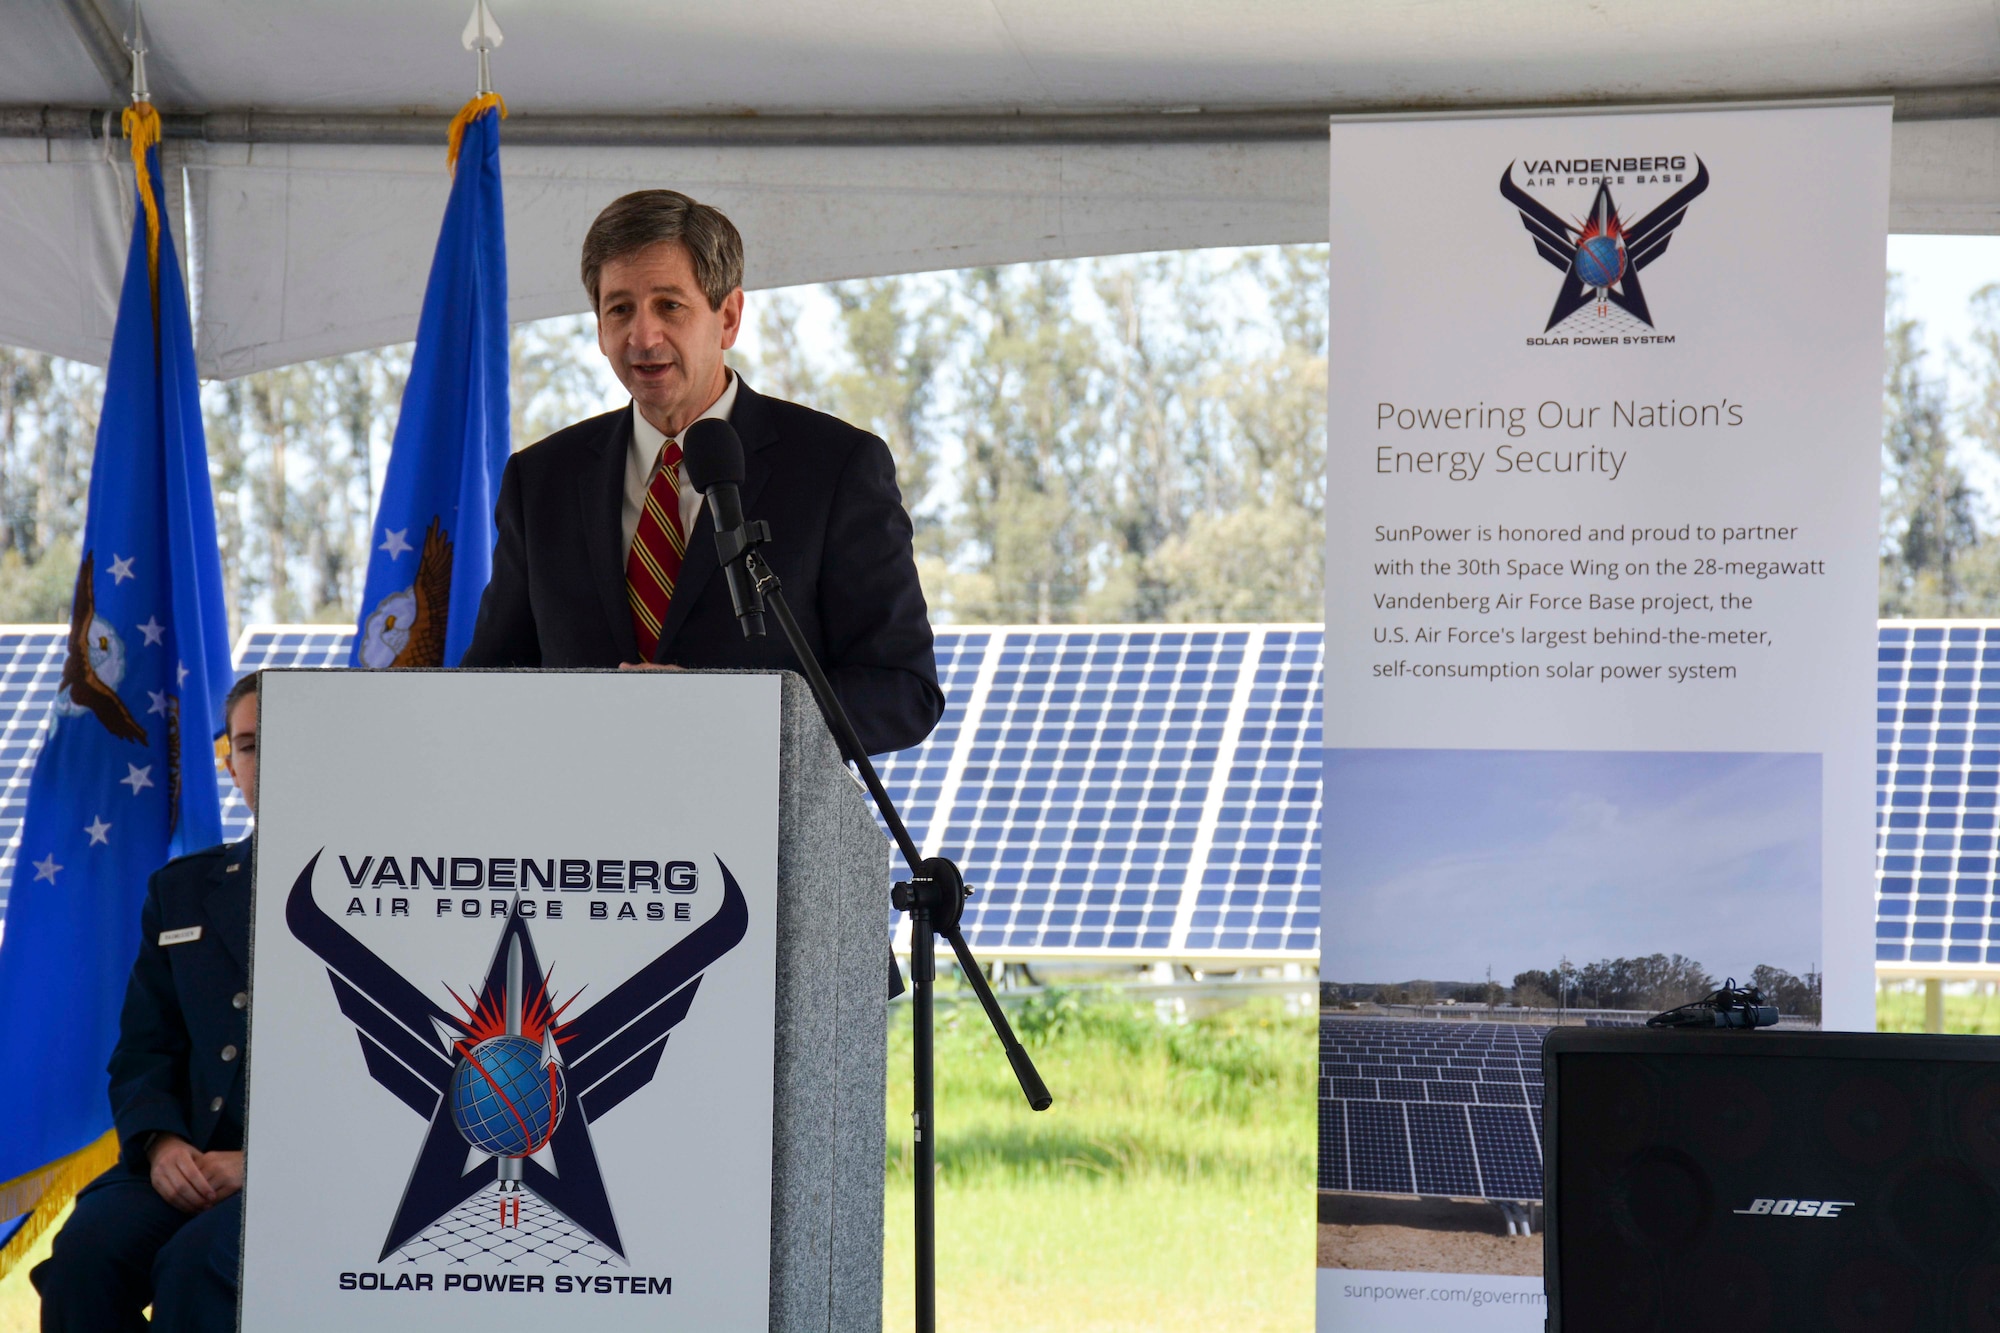 man speaks at podium on stage with rows of solar panels in background